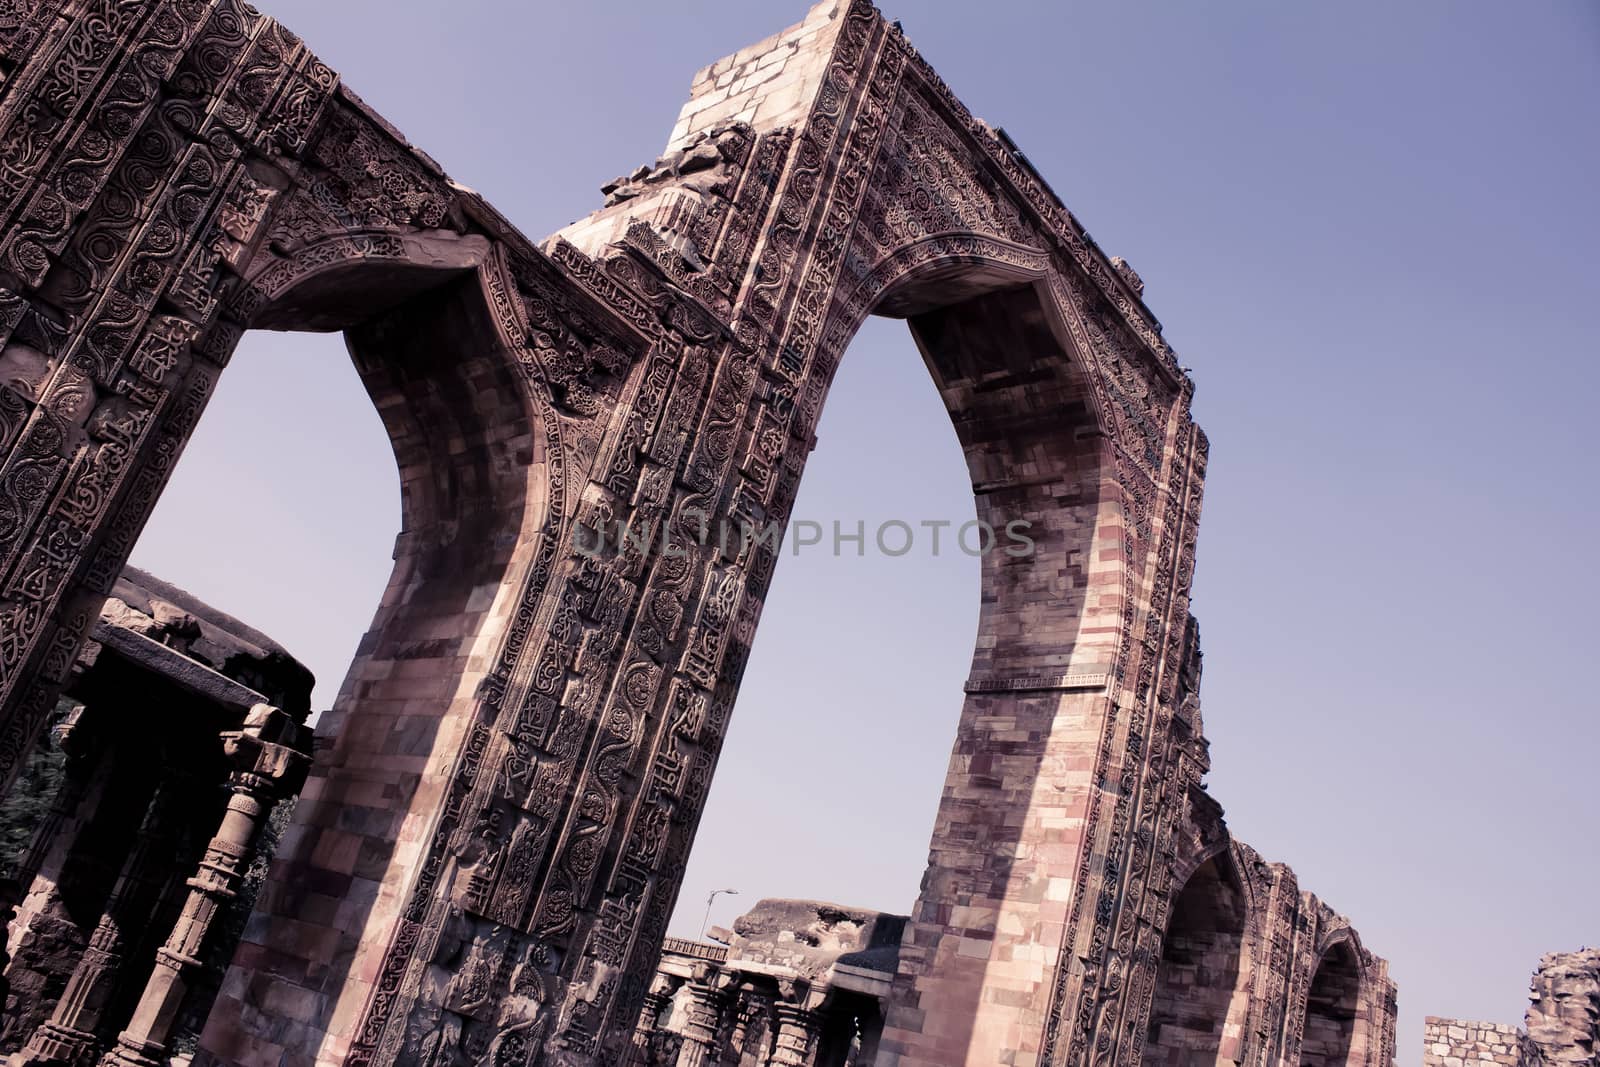 carved wall and pillars in qutub minar, vintage